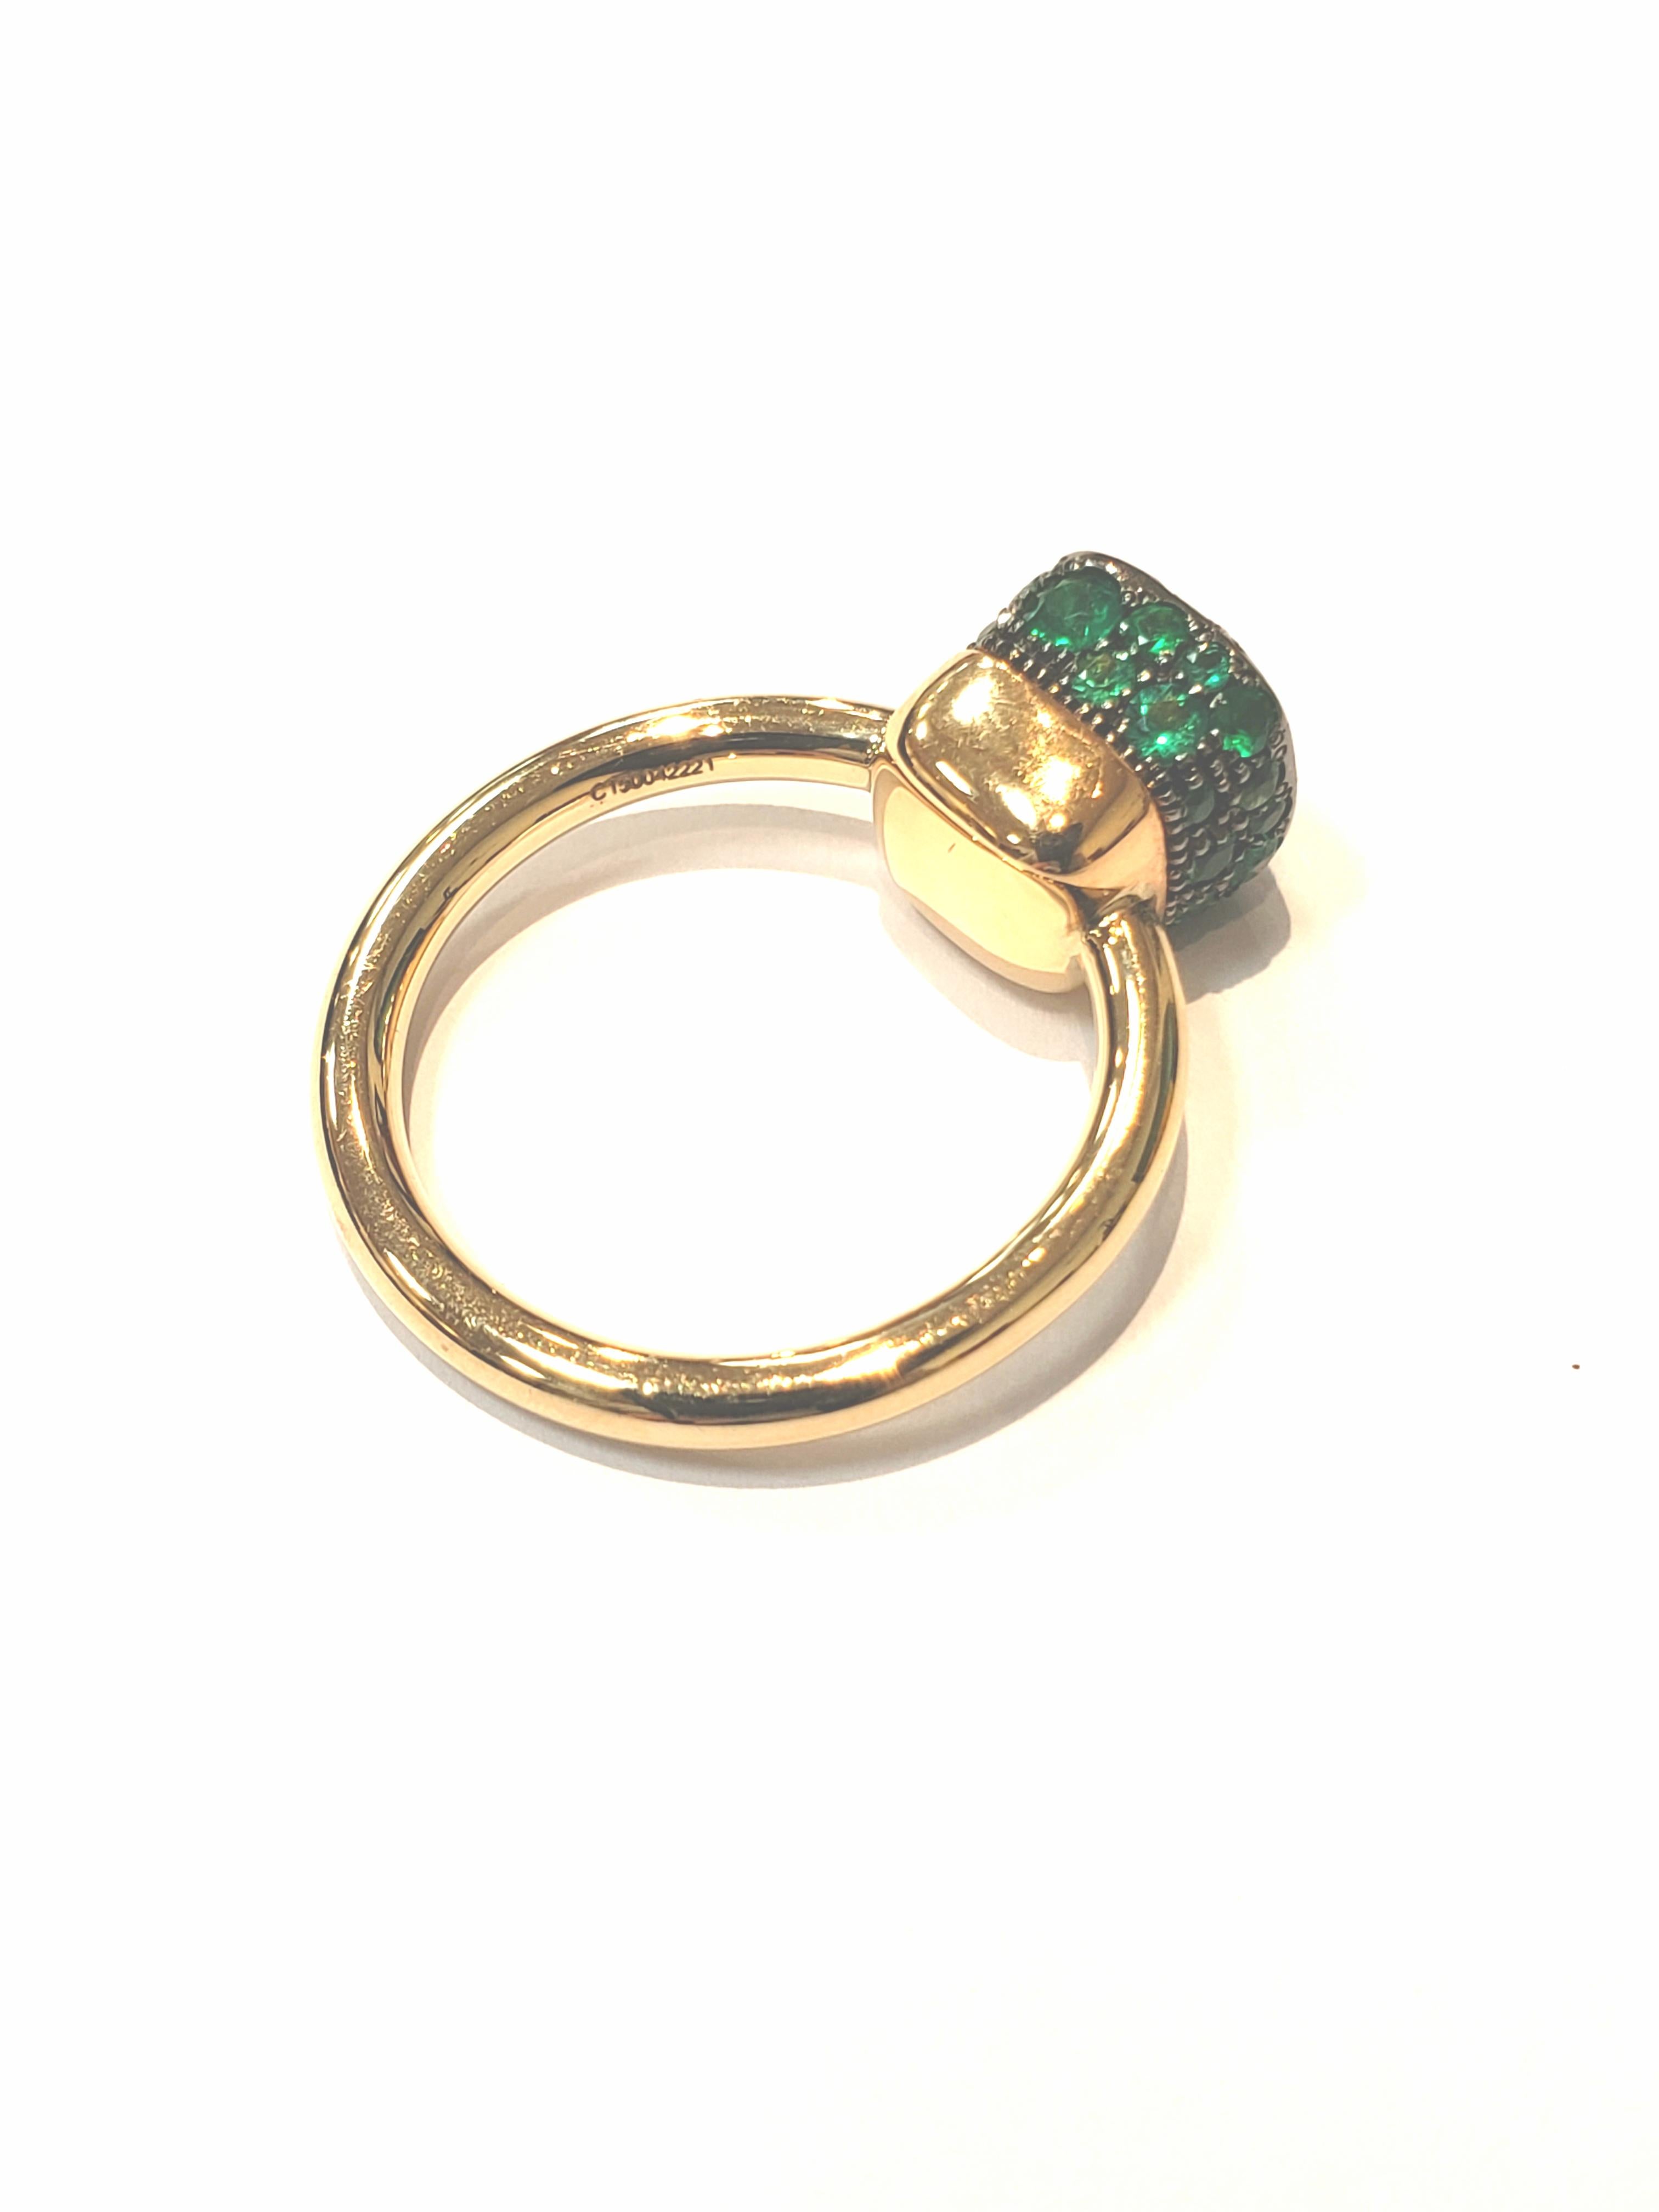 25% Off of Retail Price! From the Nudo Collection By Pomellato.
Emerald Stones Are Pave Set In 18 Karat with Black Rhodium. The balance of the ring is 18 Karat White Gold that is not Rhodium
Plated. The Ring is a European Size 52 (approx. 6.5). Ring